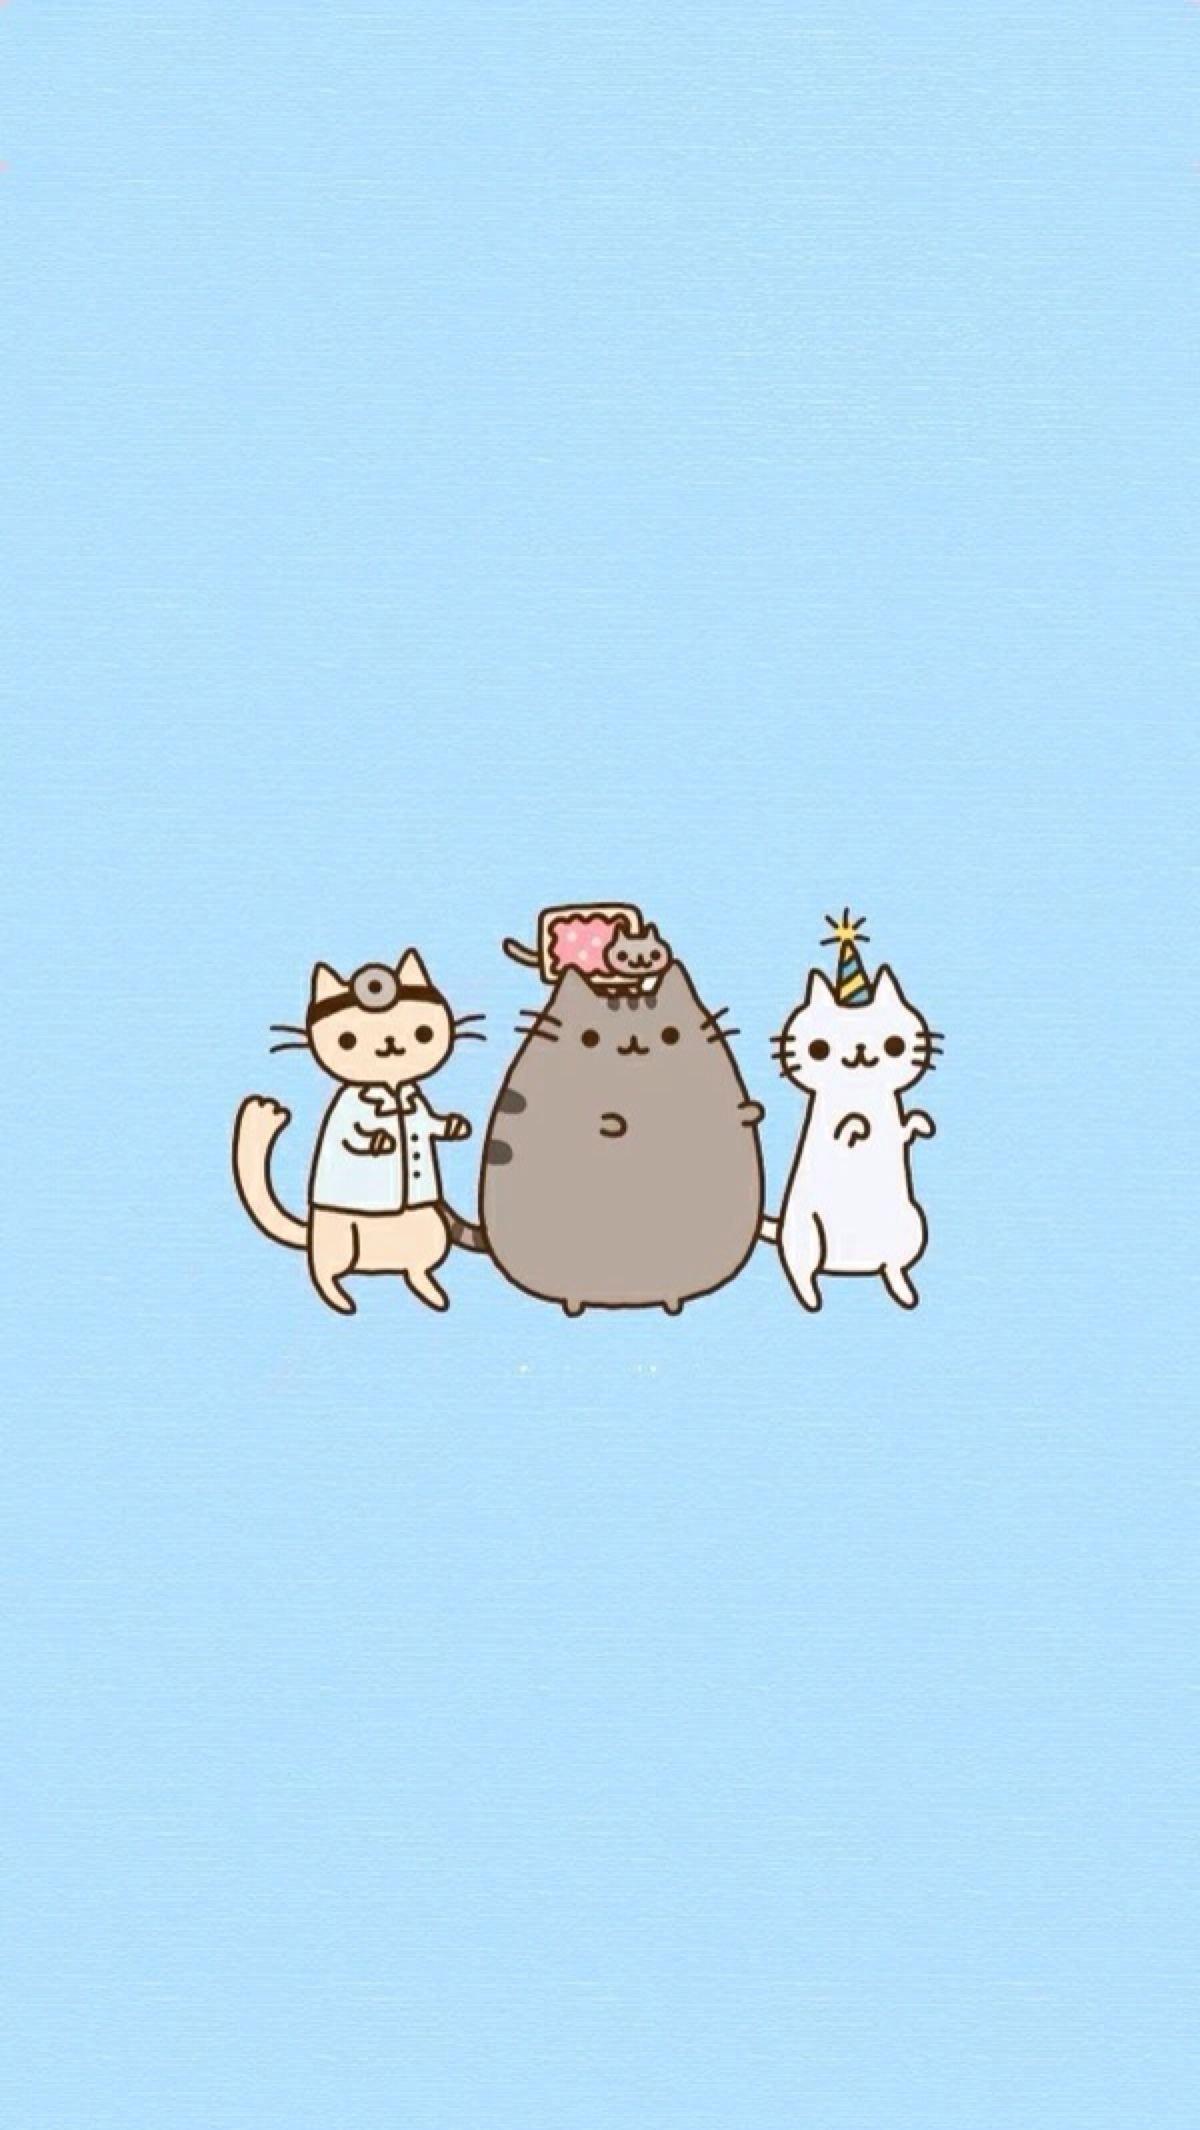 Pusheen The Cat Background. Funny Cat & Dog Picture